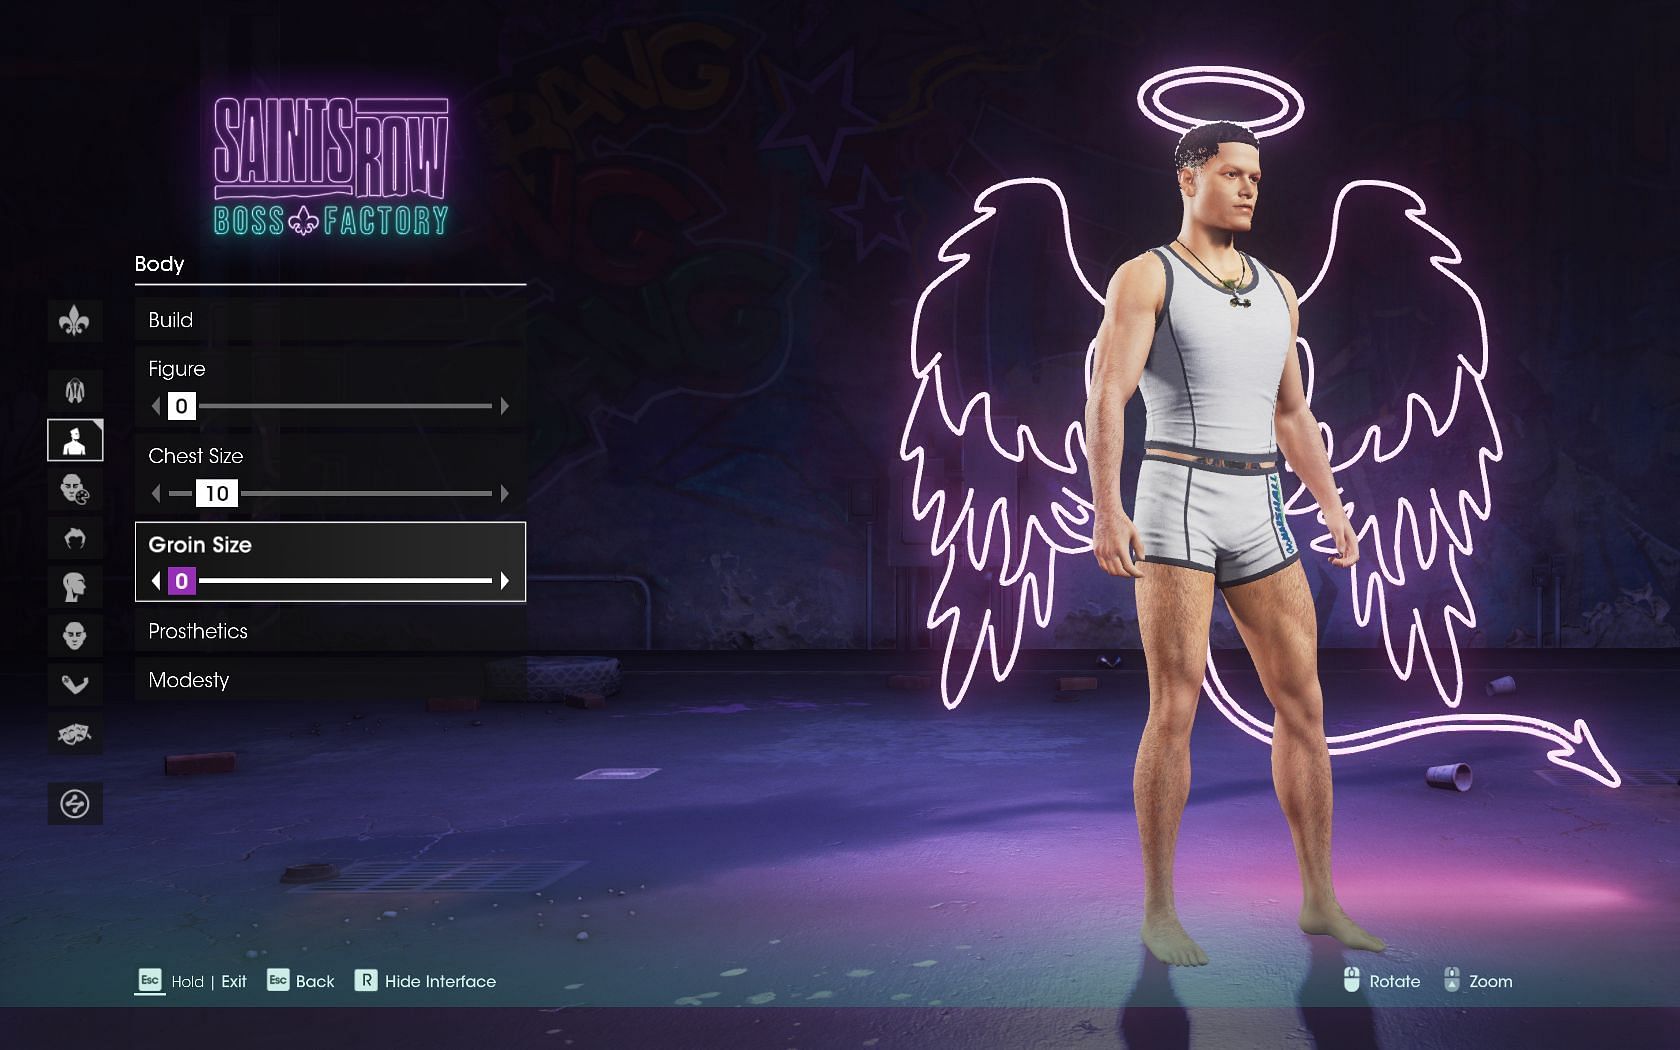 Customize physique with the Build option (Screenshot from Saints Row: Boss Factory demo)